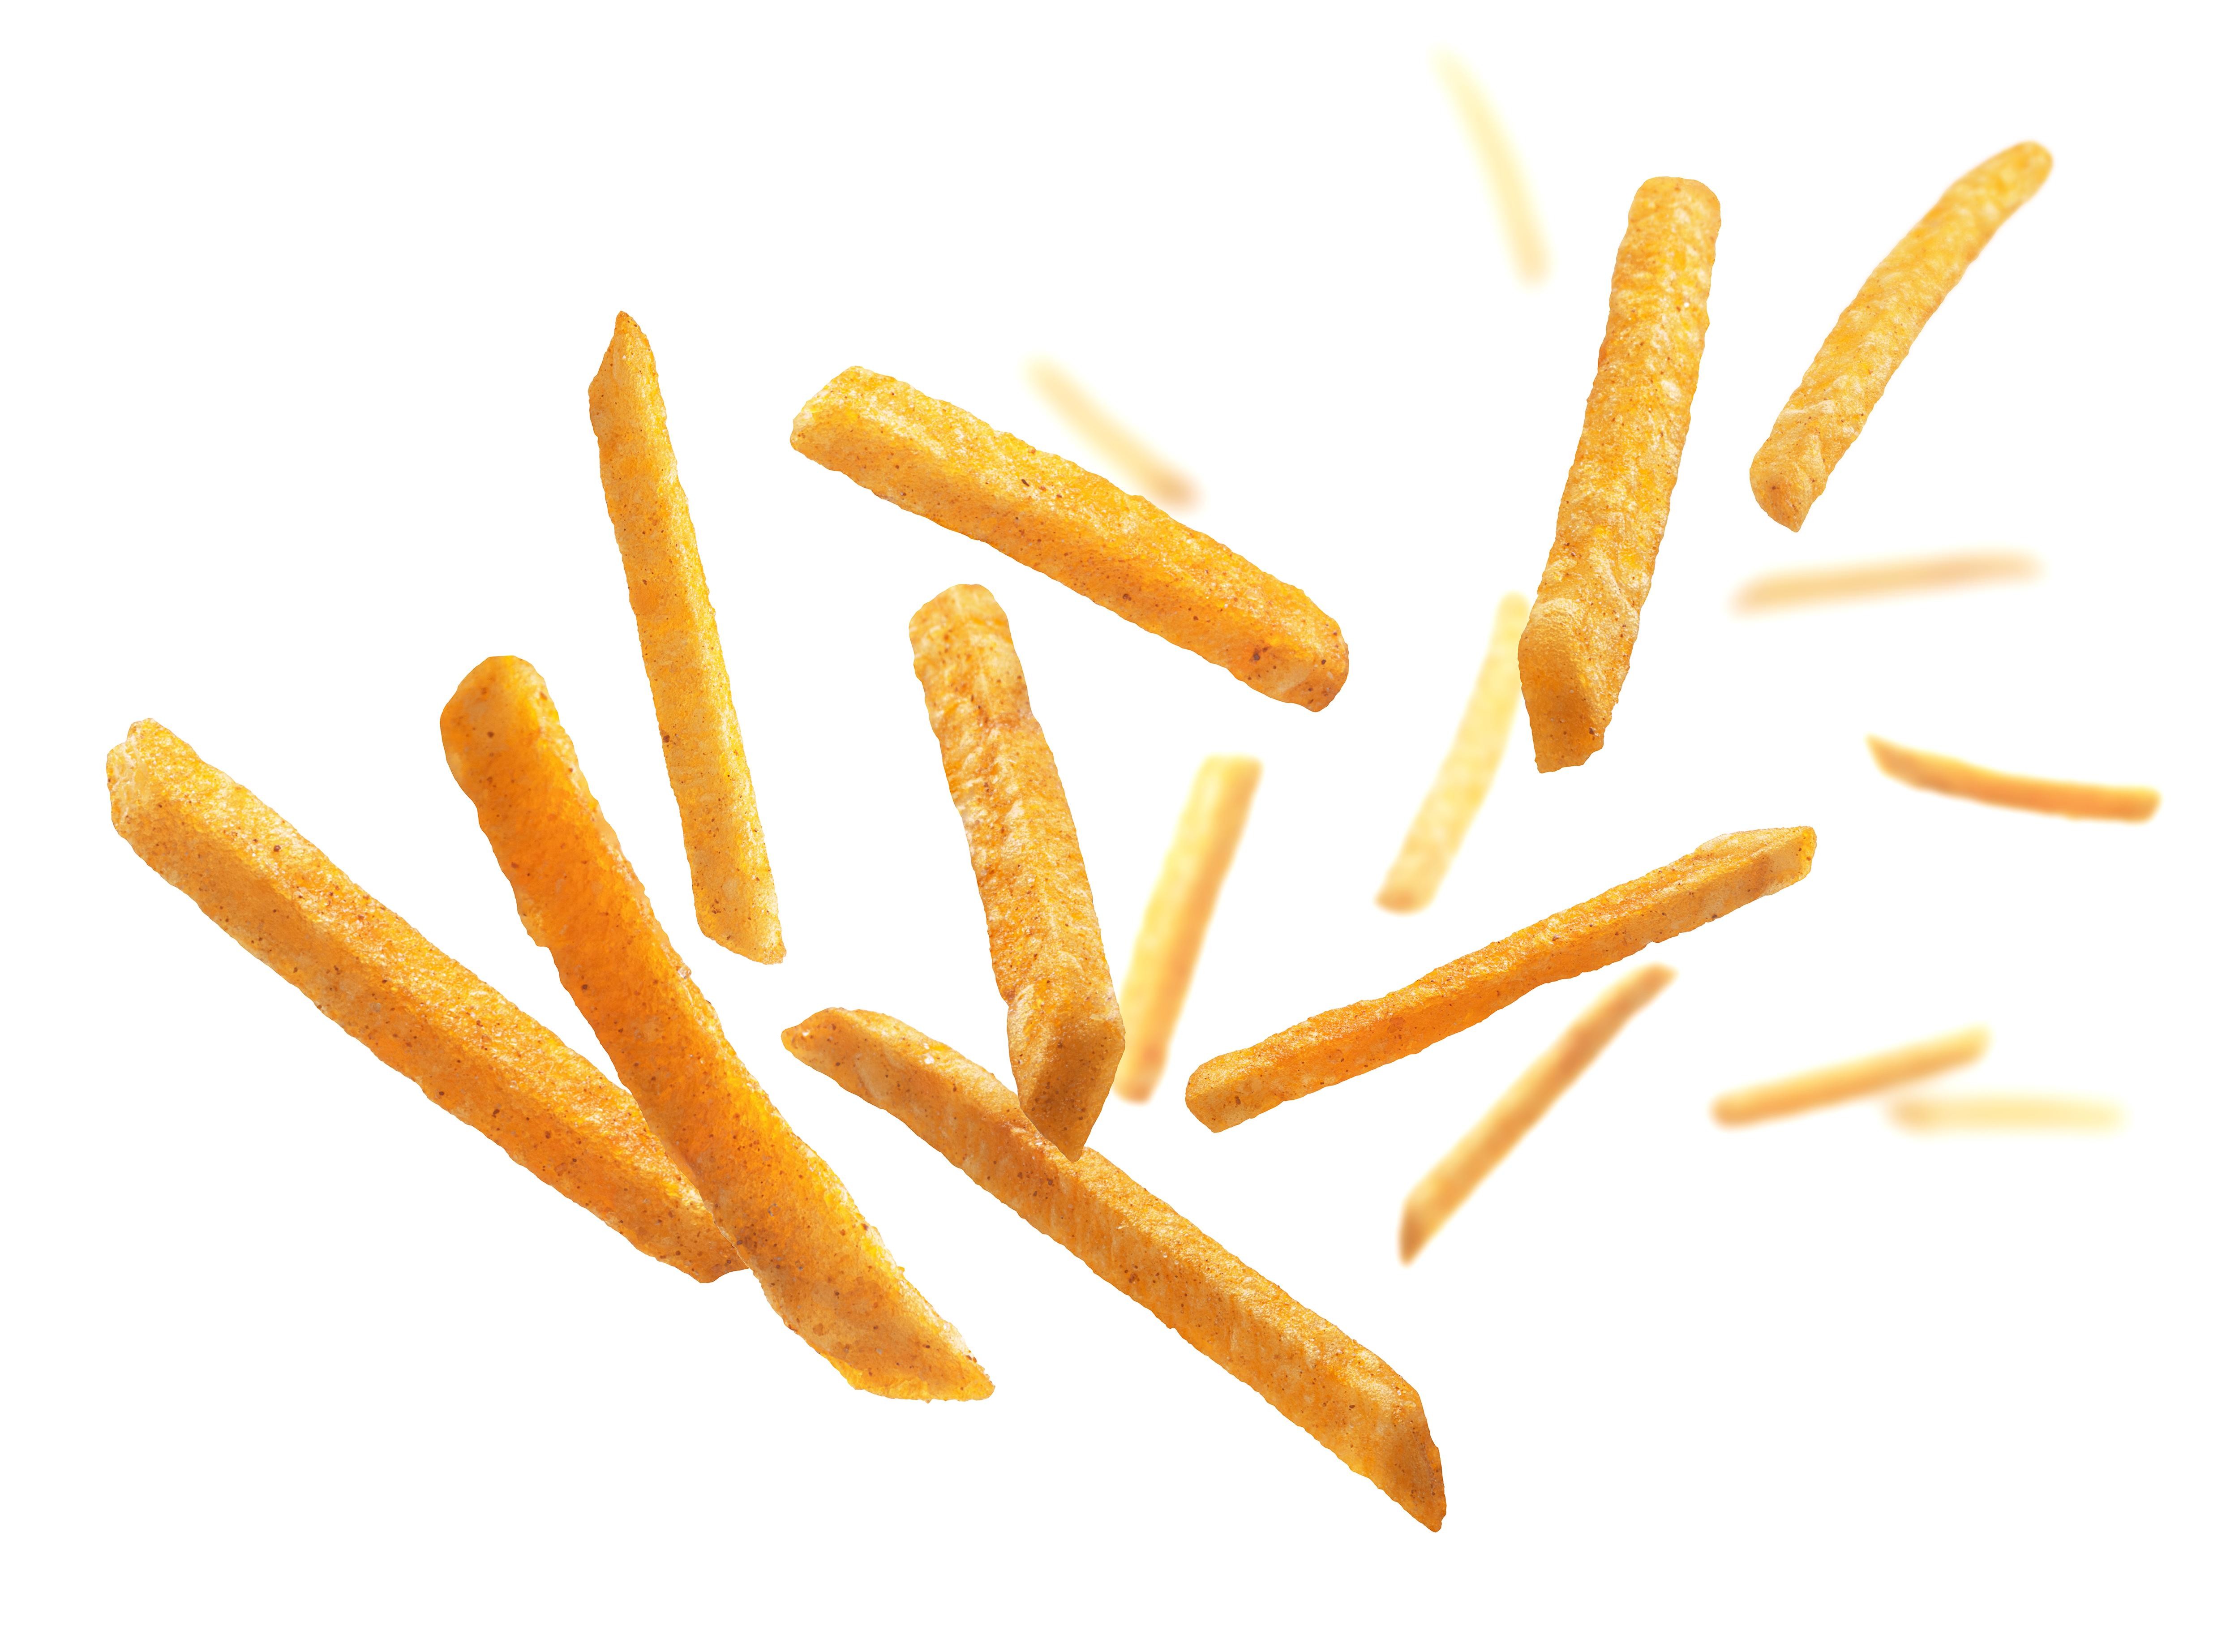 Crisby Fries